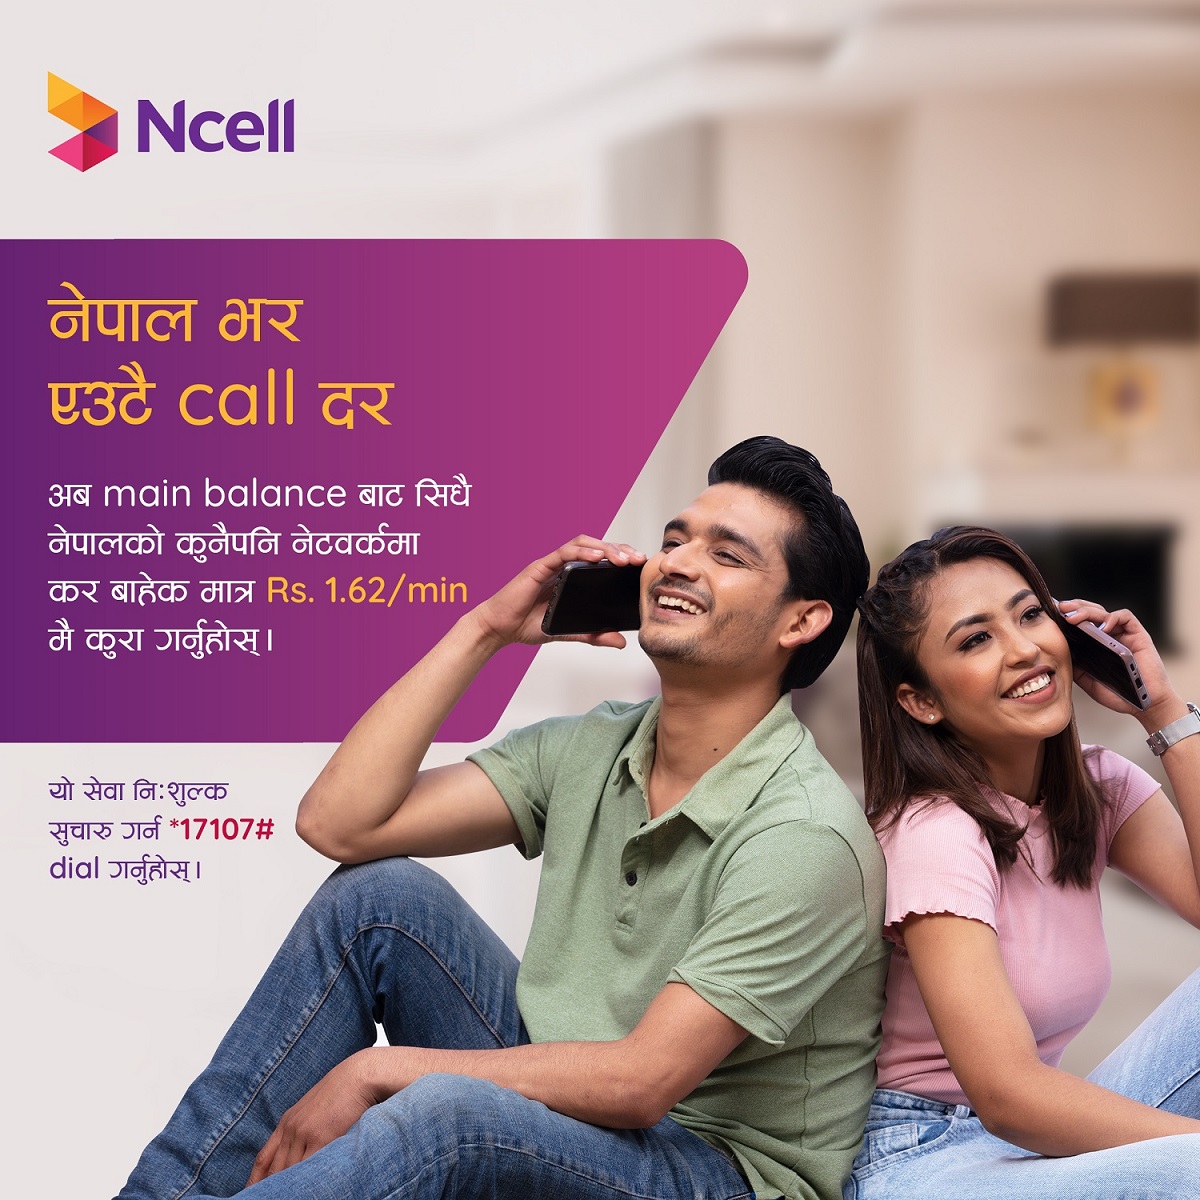 Ncell takes big steps in reducing all local call rates